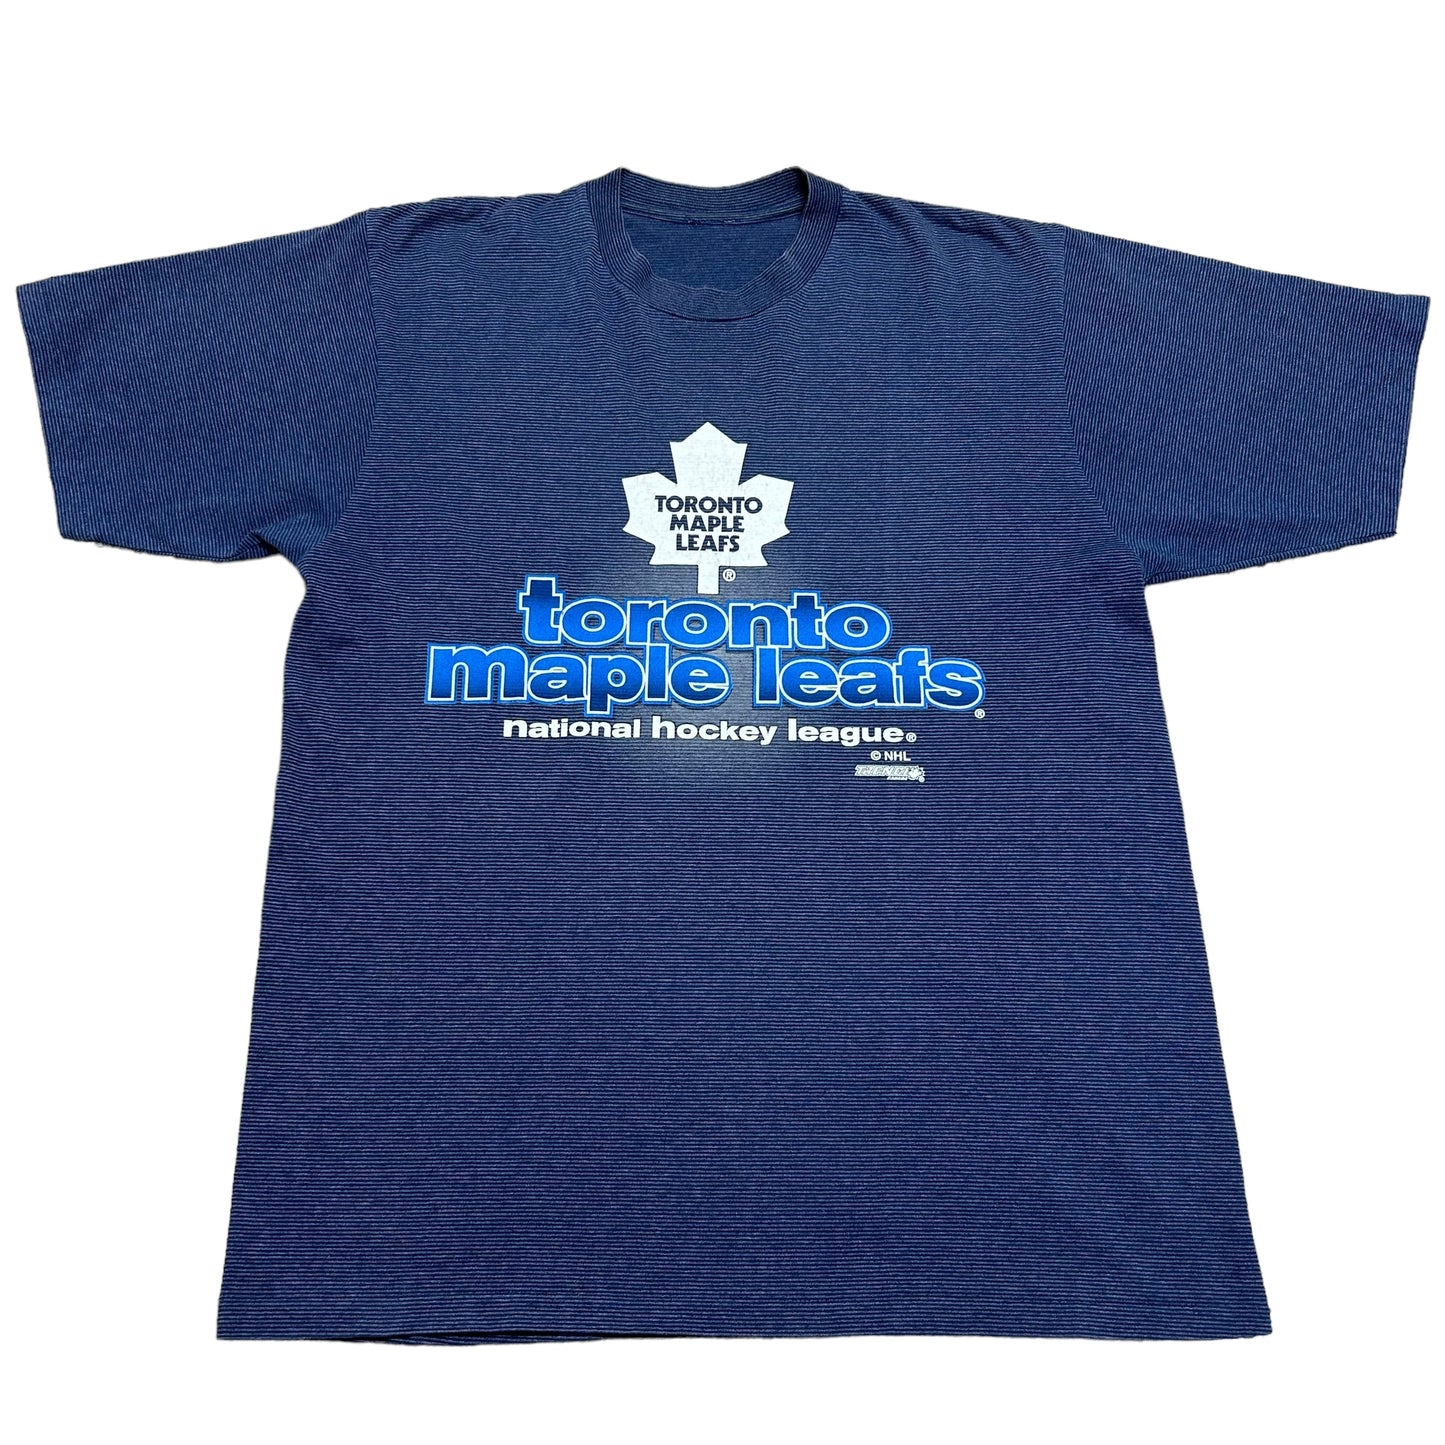 Vintage 1990s Trench Canada Toronto Maple Leafs Blue Striped Graphic T-Shirt - Size XL